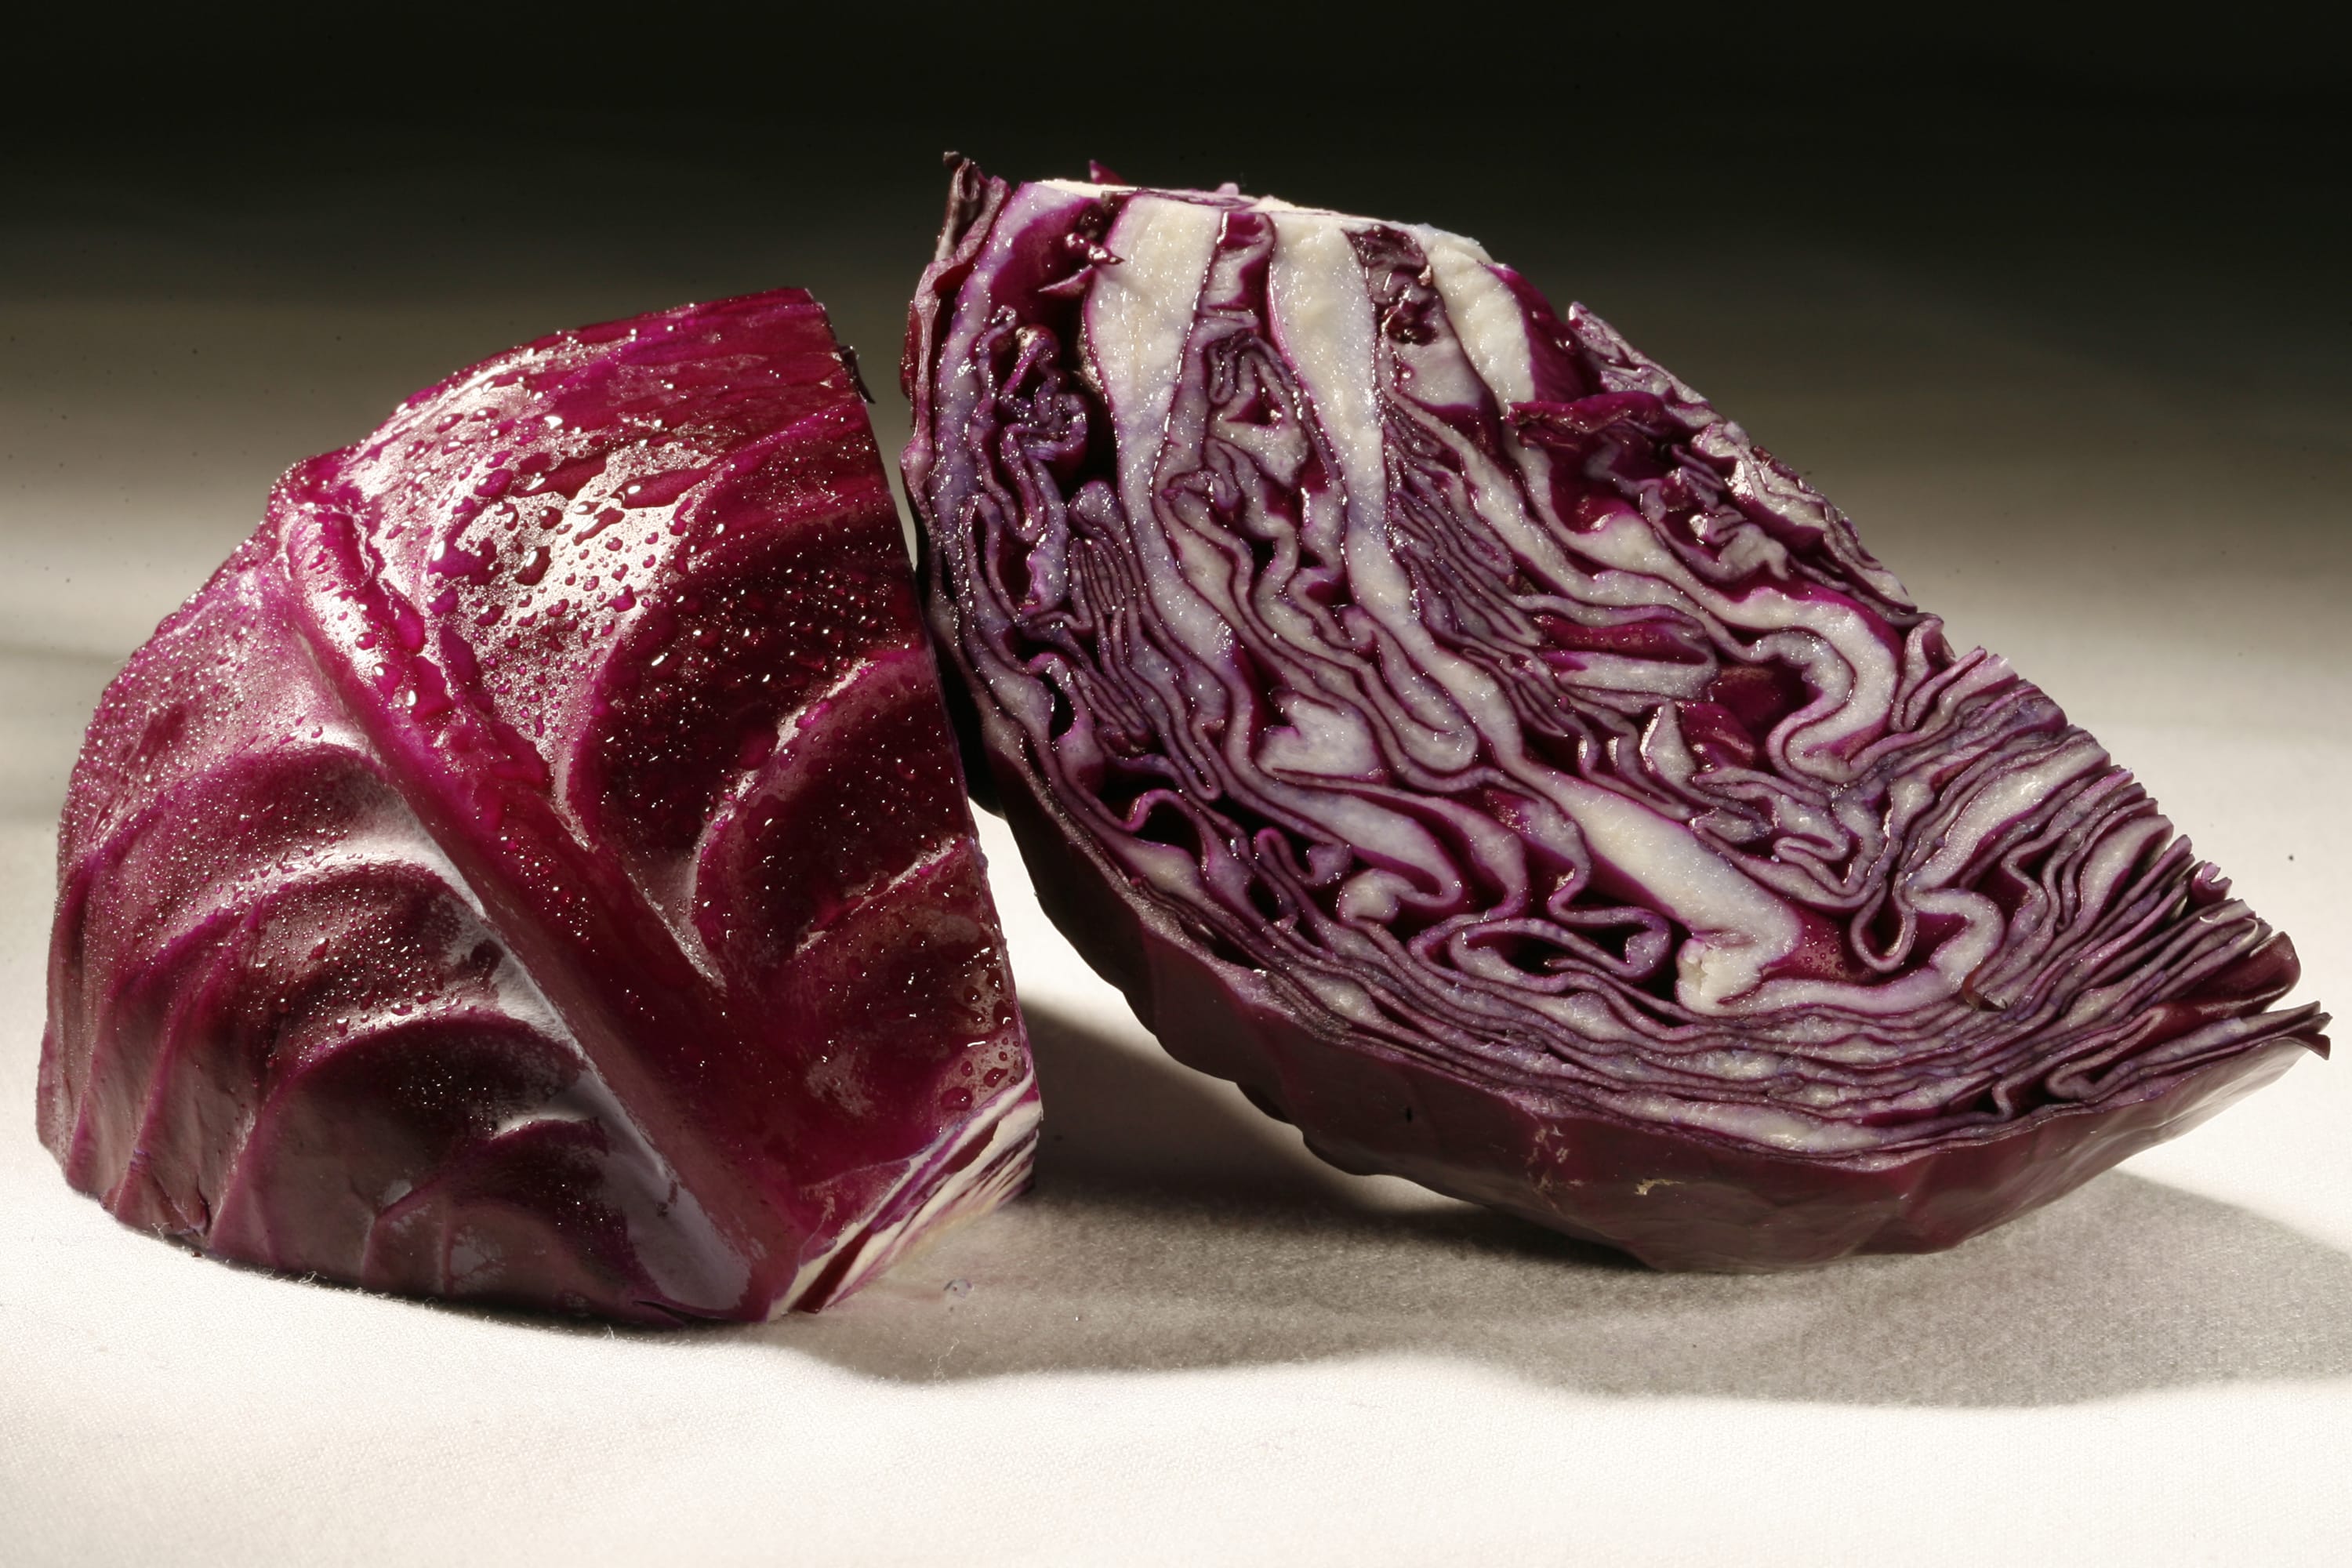 Red cabbage has a slightly tougher texture and, some say, a slightly sweeter flavor than green cabbage.